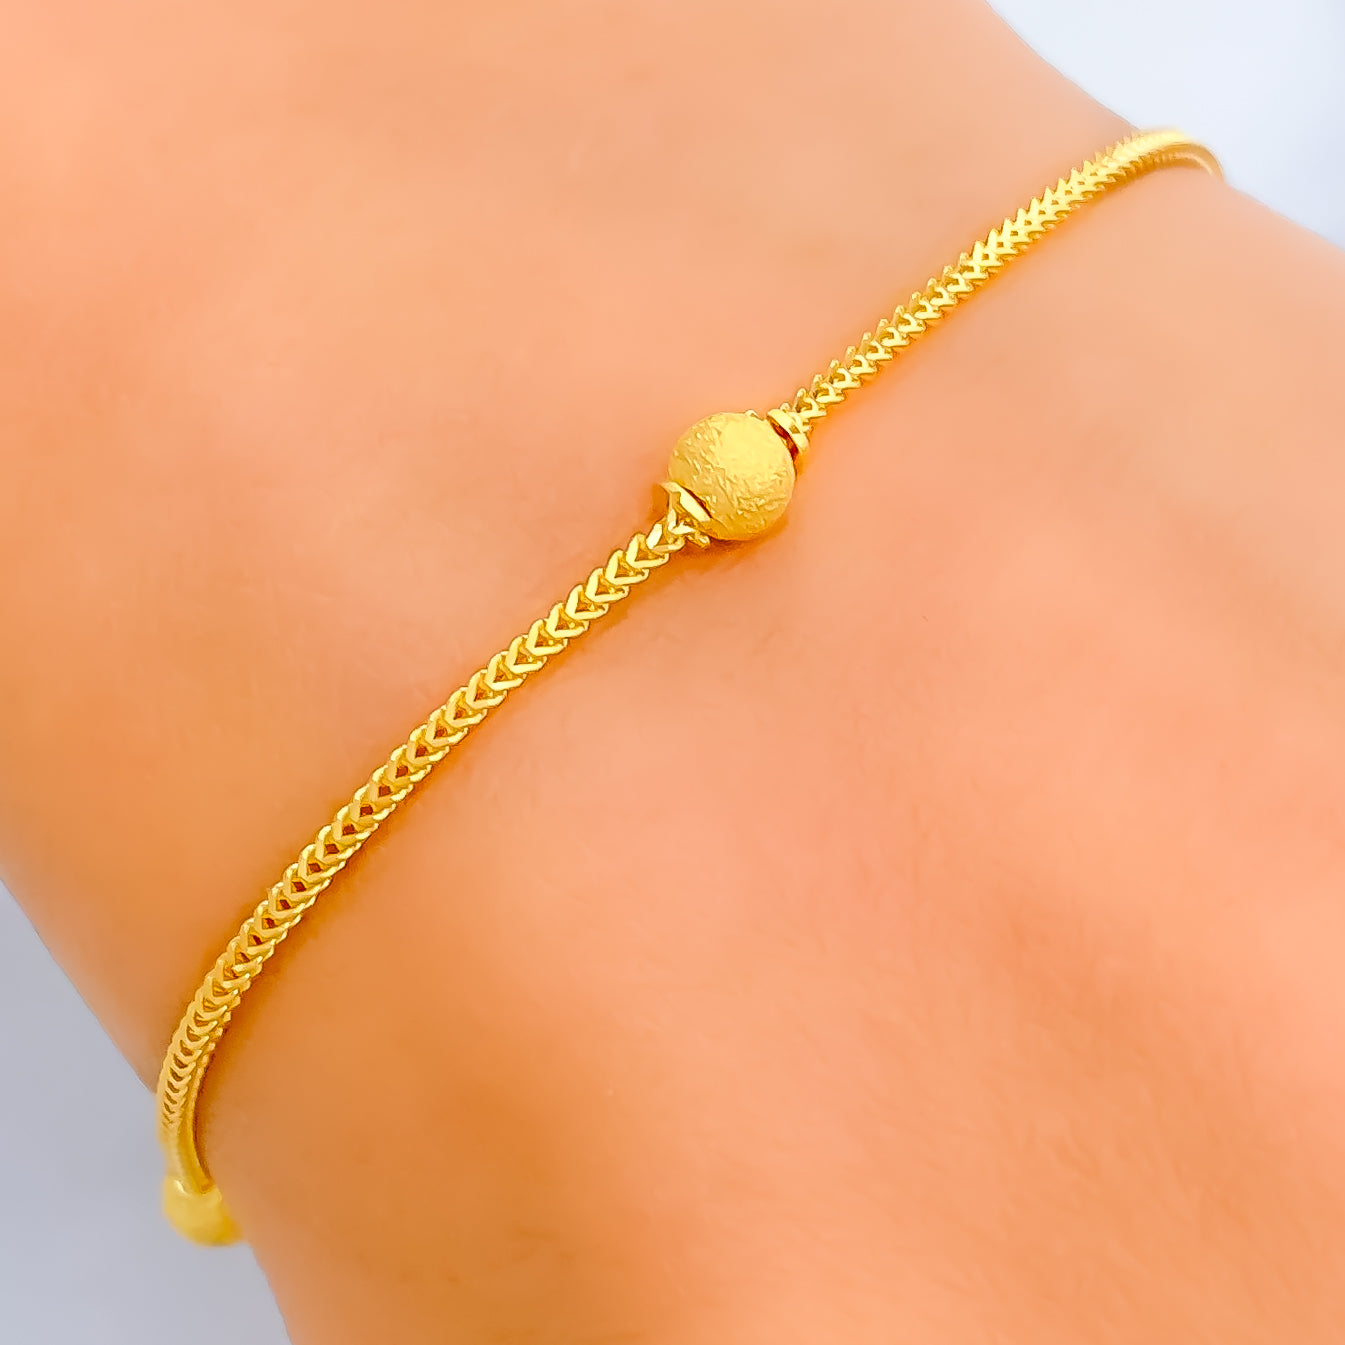 Thin Light Weight Gold Design Baby Bangles for Regular Wear Smooth B25214